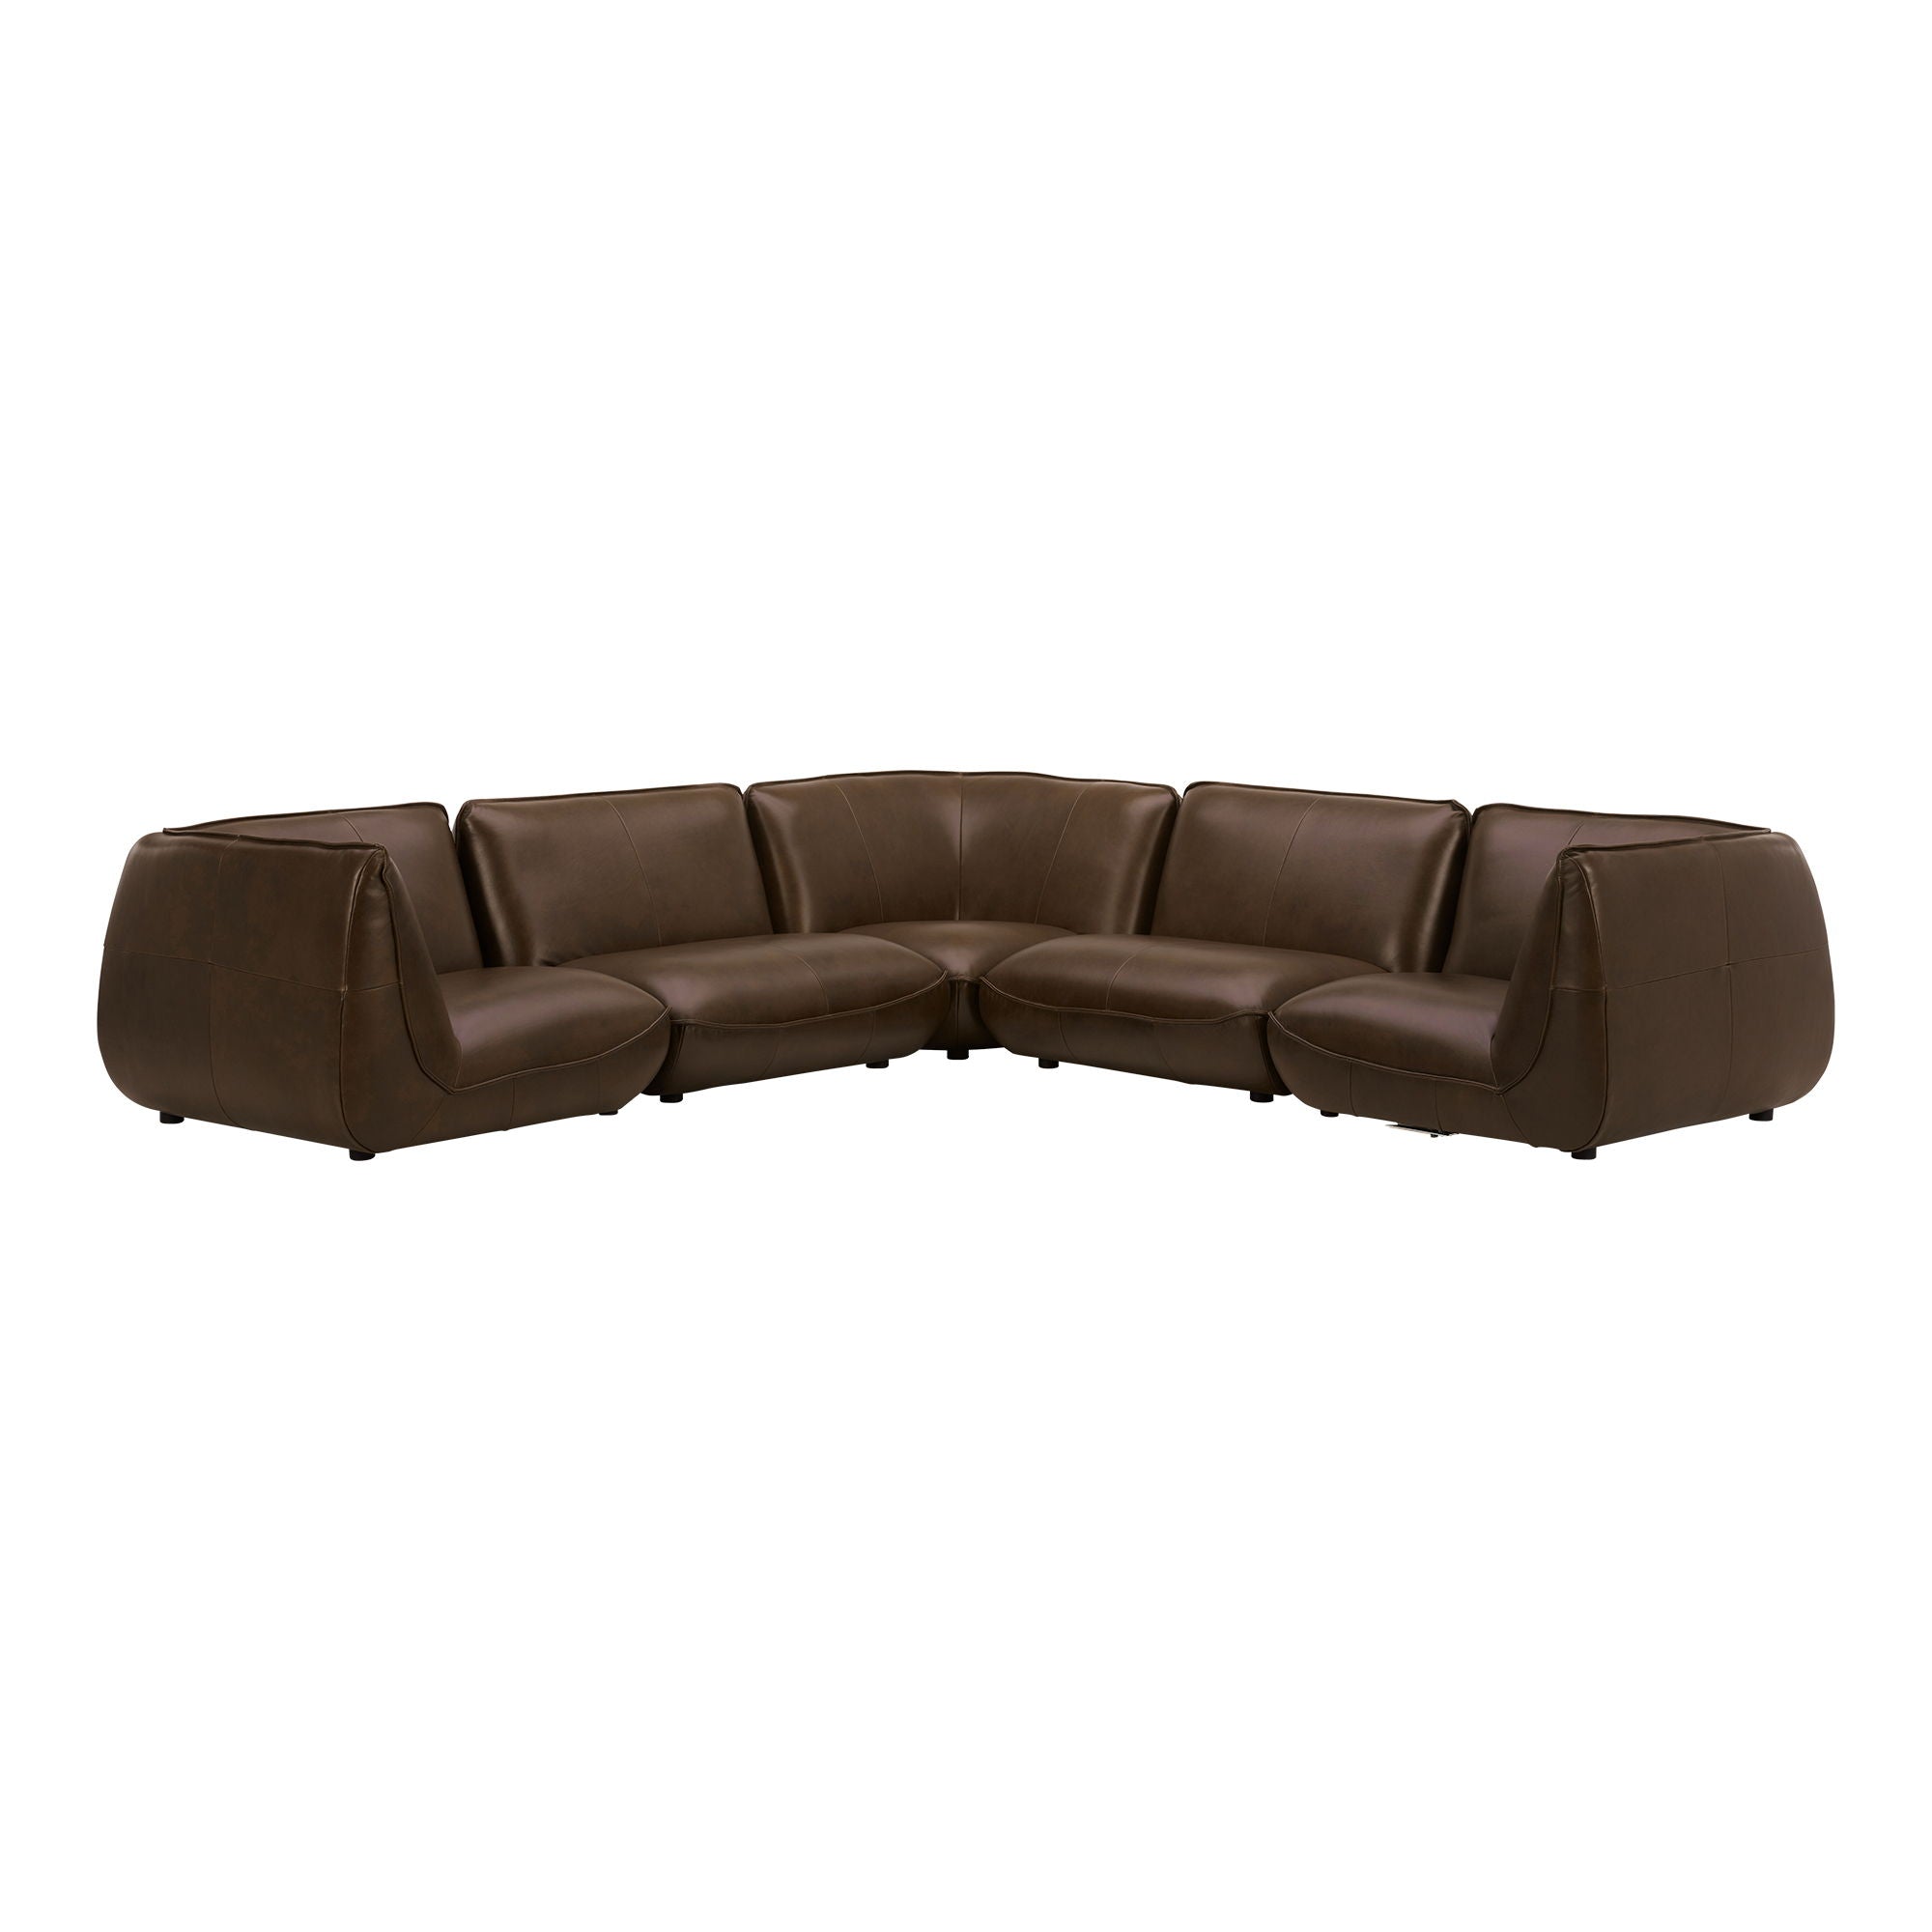 Zeppelin - Classic L Modular Leather Sectional